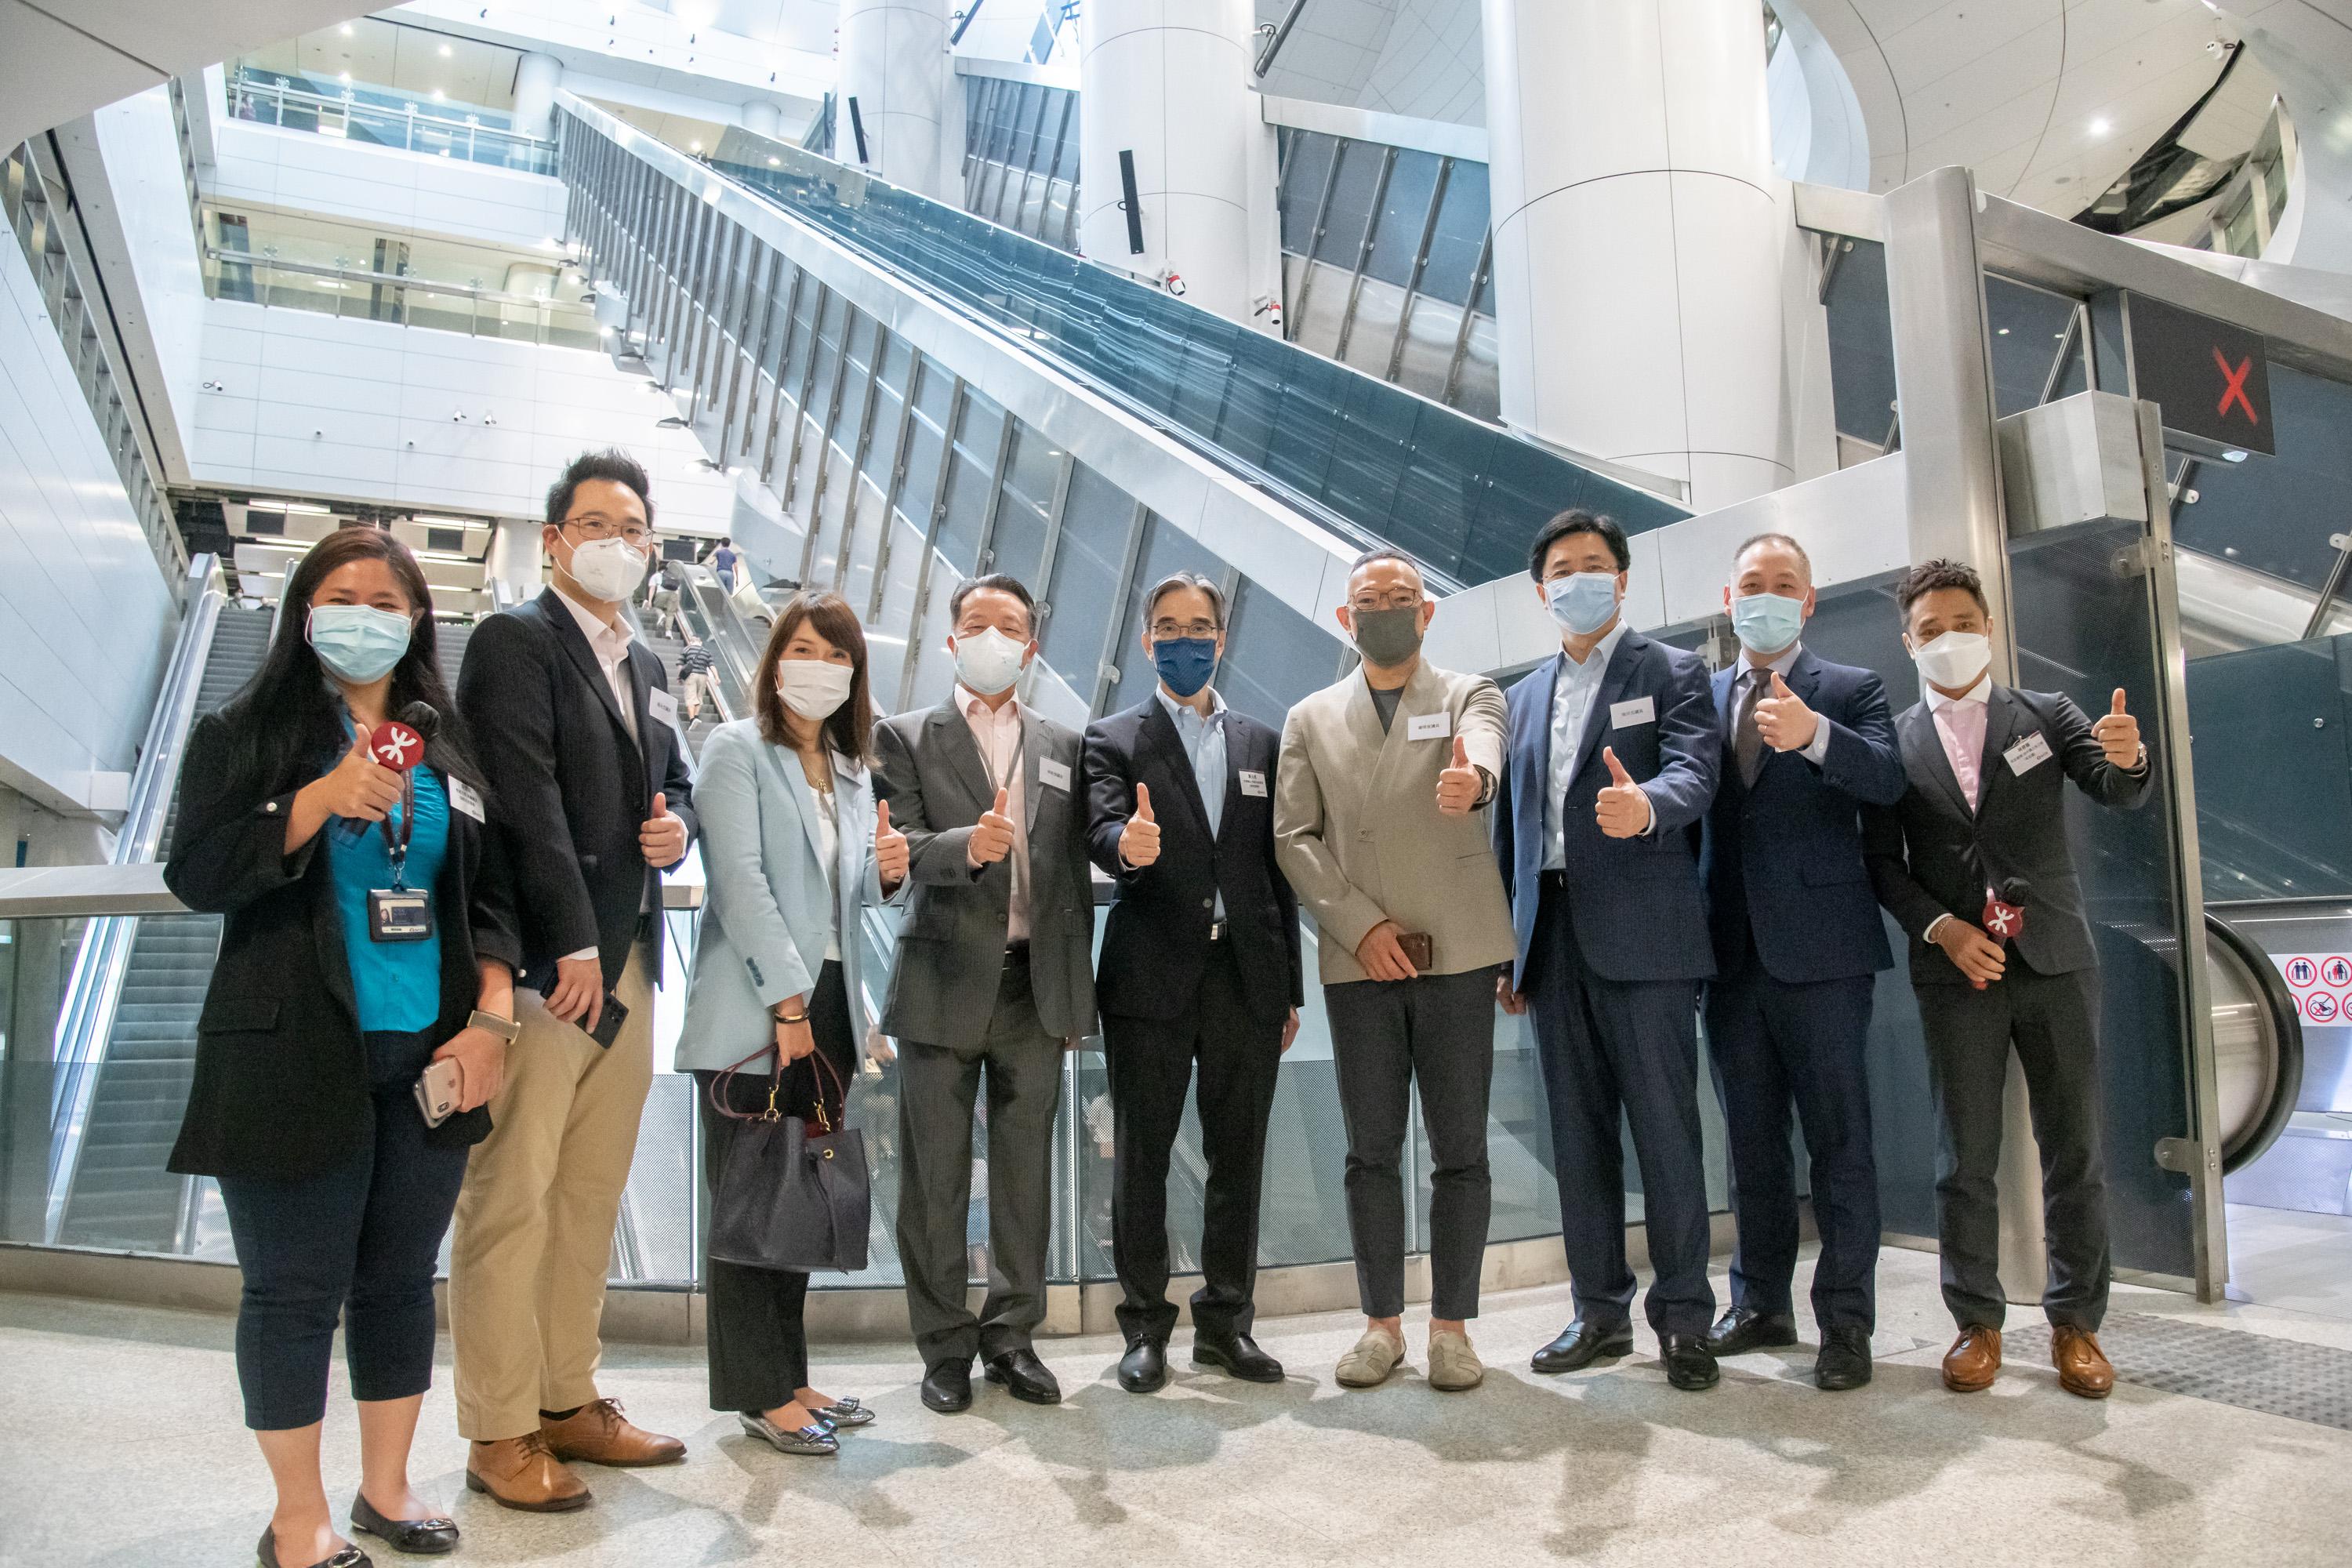 The Legislative Council (LegCo) Panel on Transport visits Admiralty and Exhibition Centre Stations of the East Rail Line cross-harbour extension today (May 6). Photo shows LegCo members visiting the concourse area of the Admiralty Station extension.